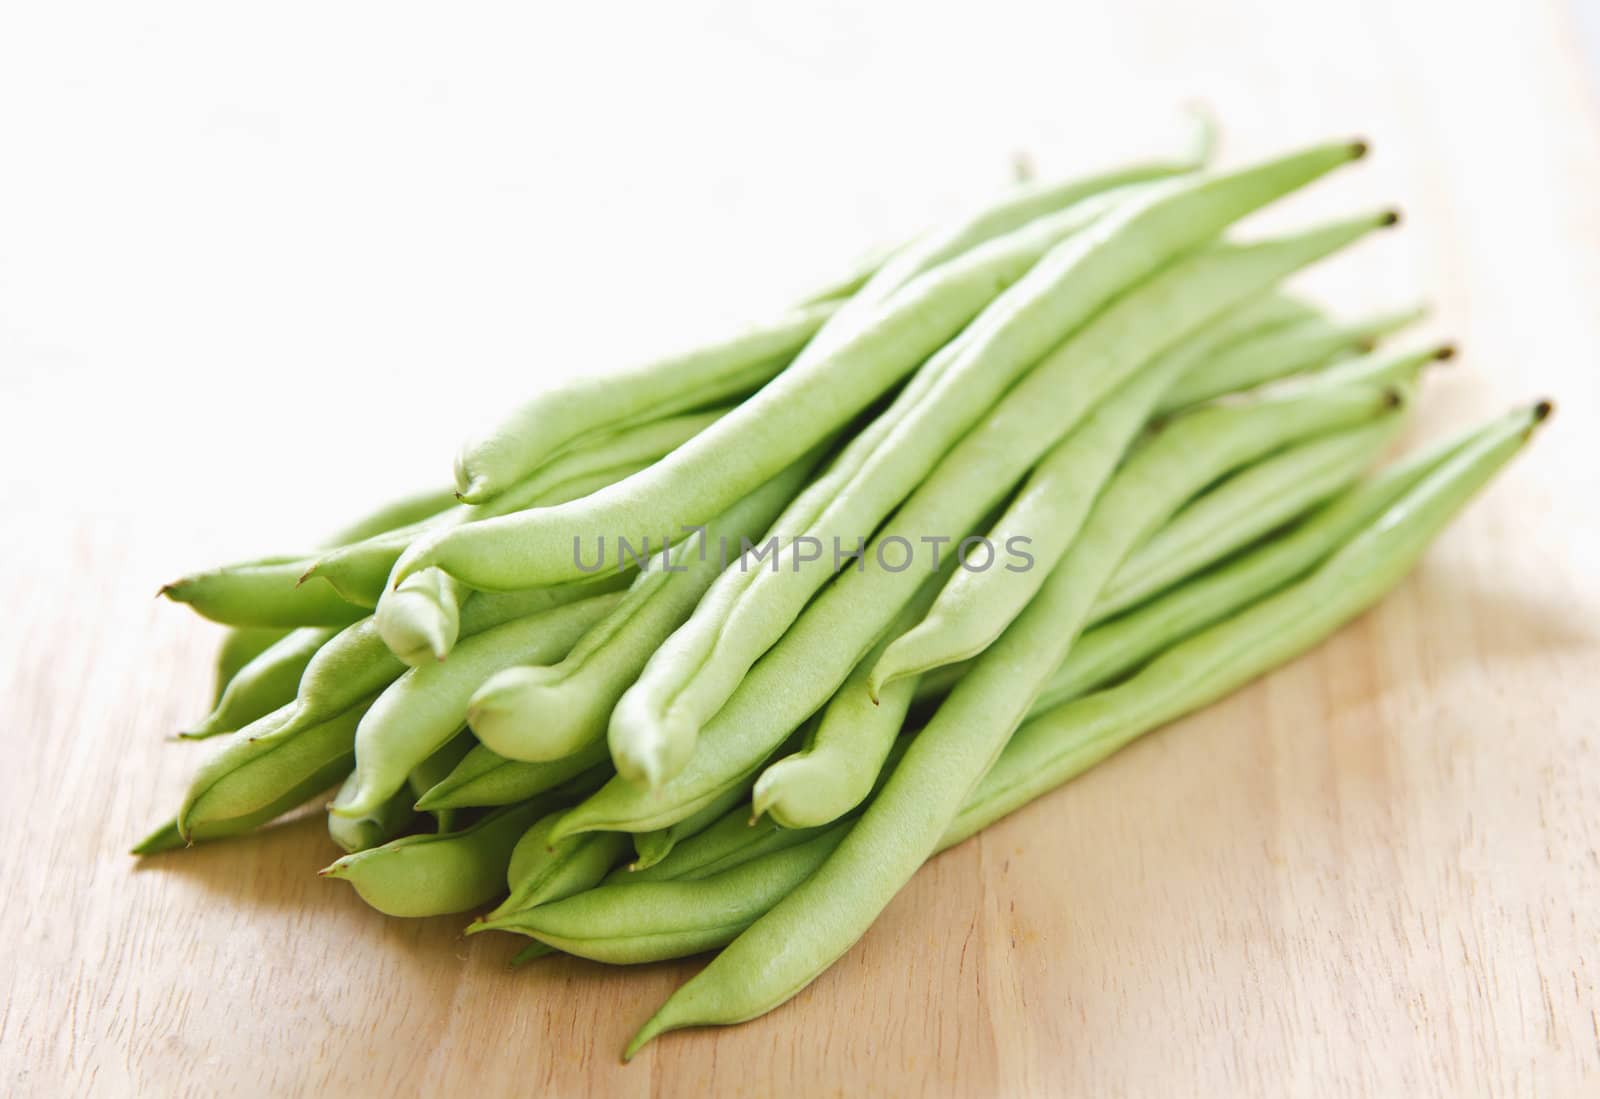 Green beans by vanillaechoes